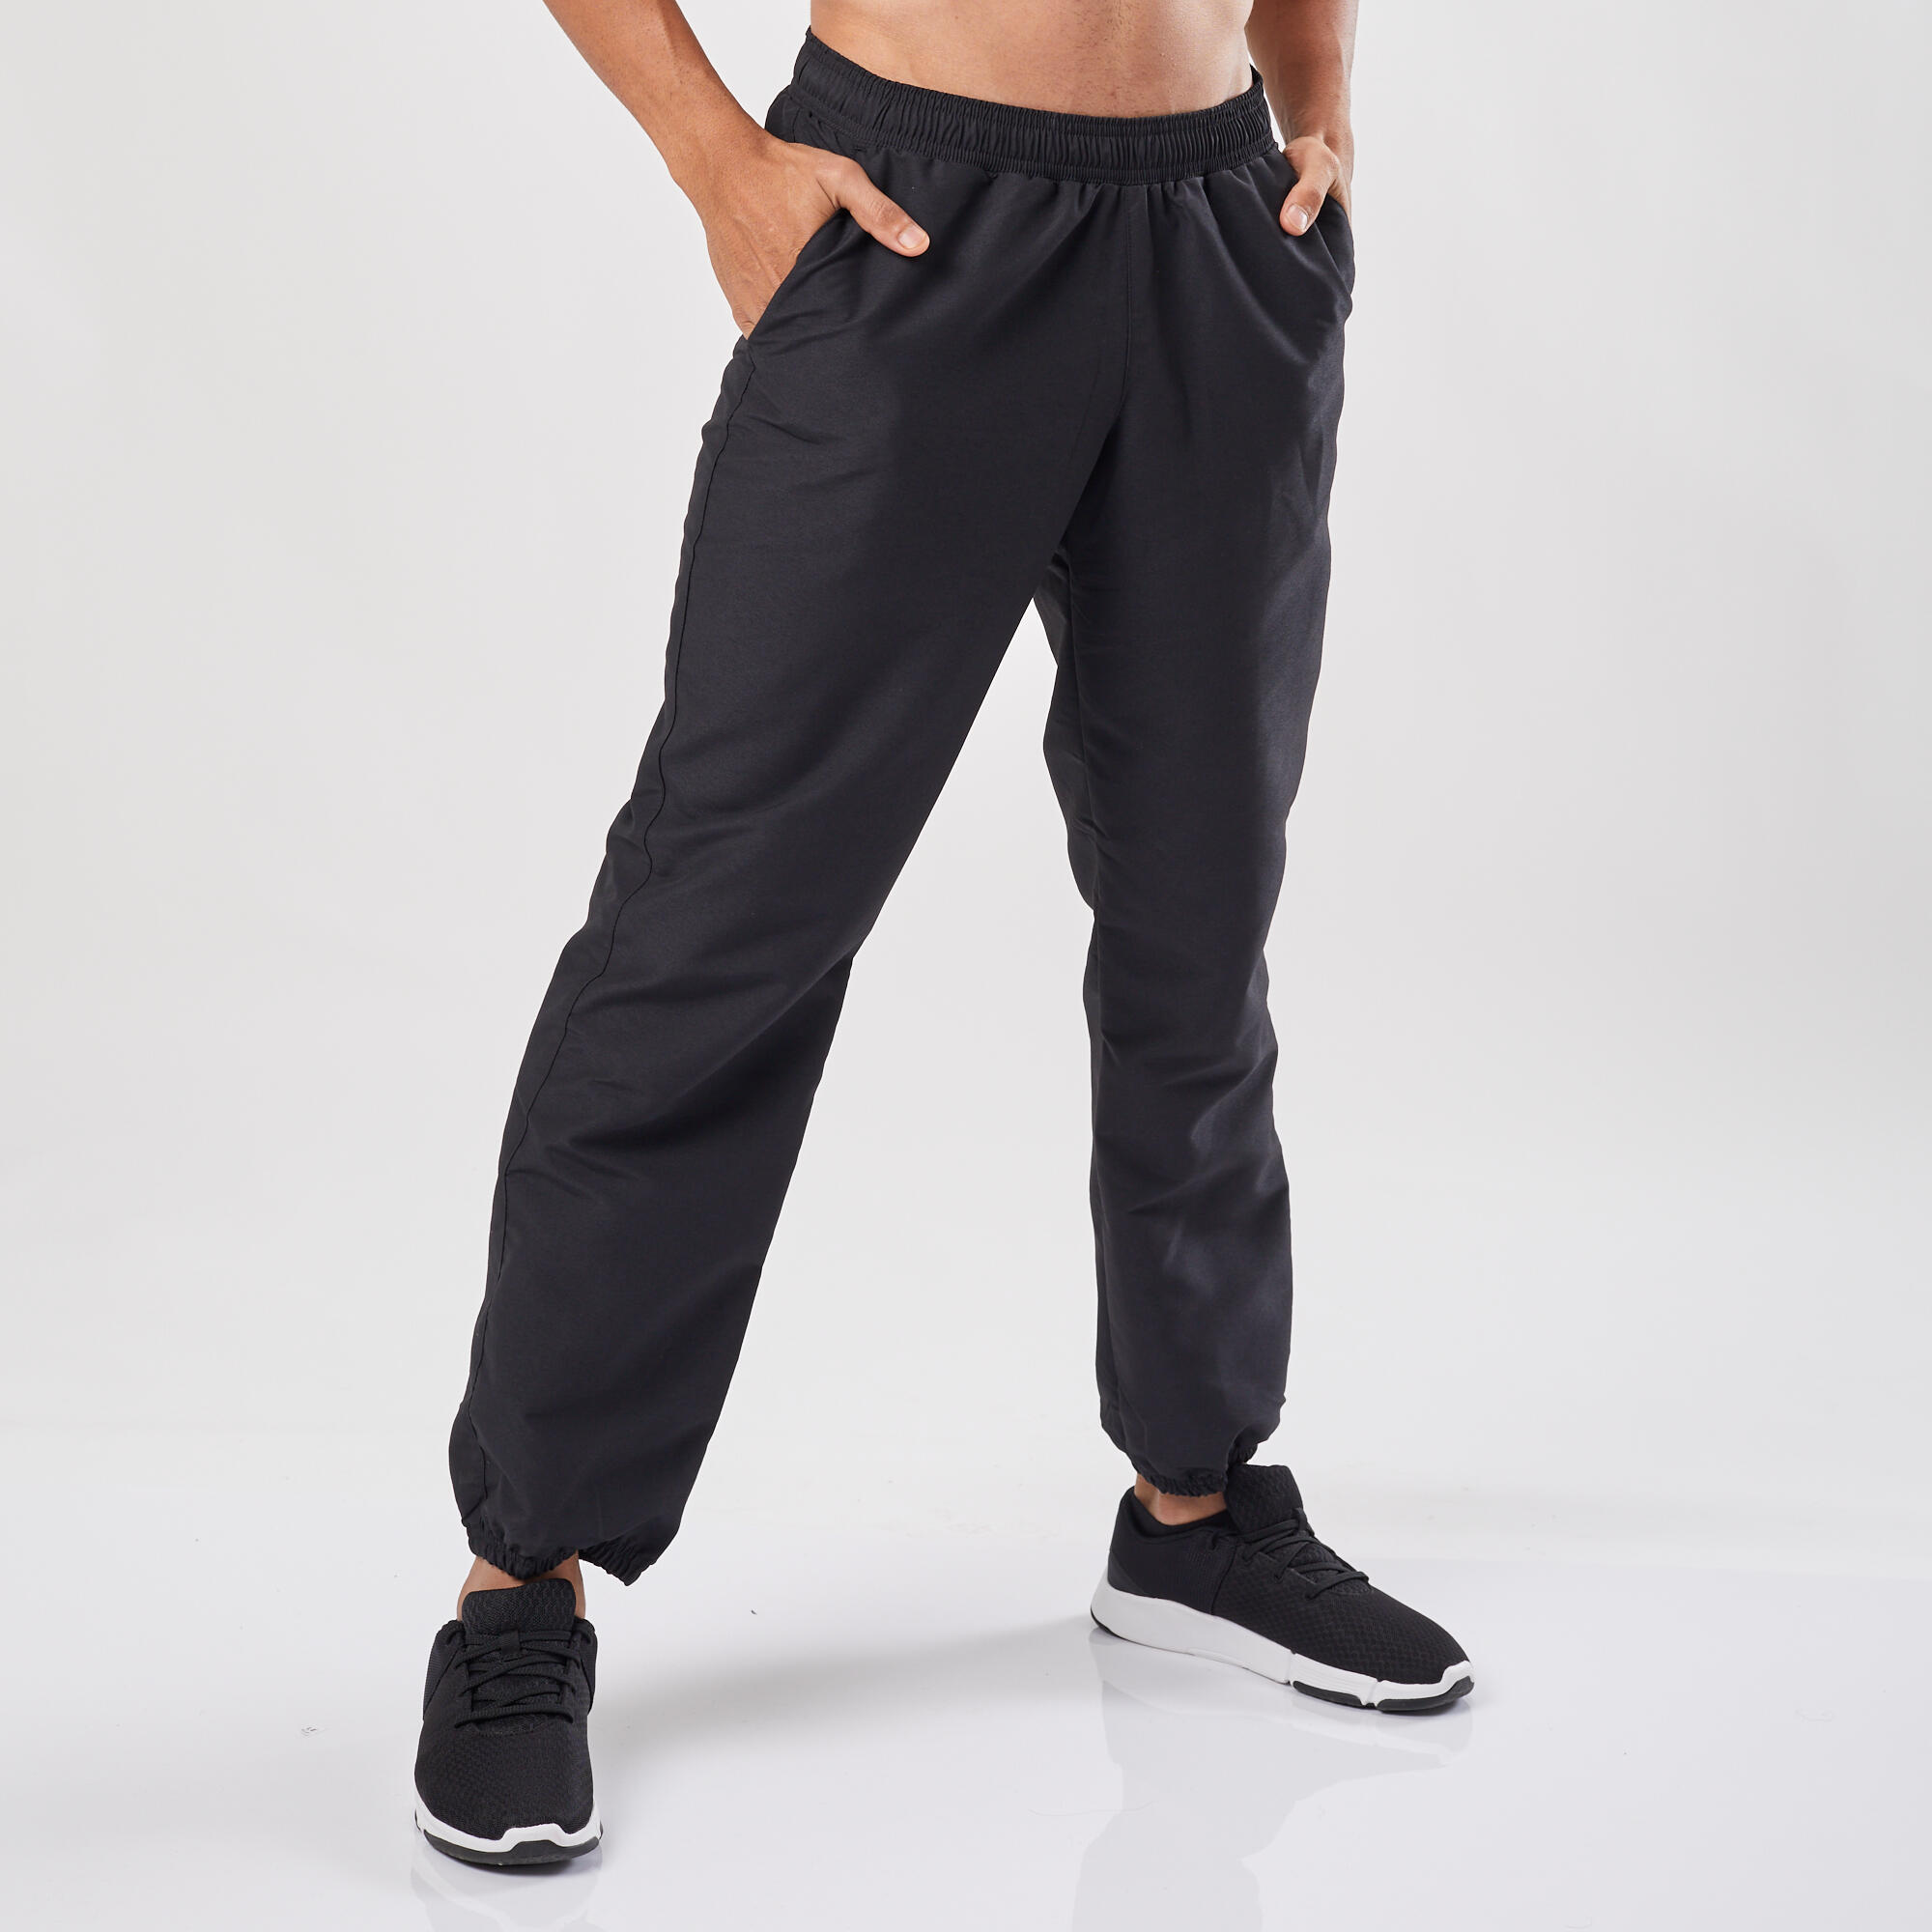 Men's Slim Fit Polyester Lycra Track pants with Zipper pockets and  reflective Logo - 4-Way Stretch